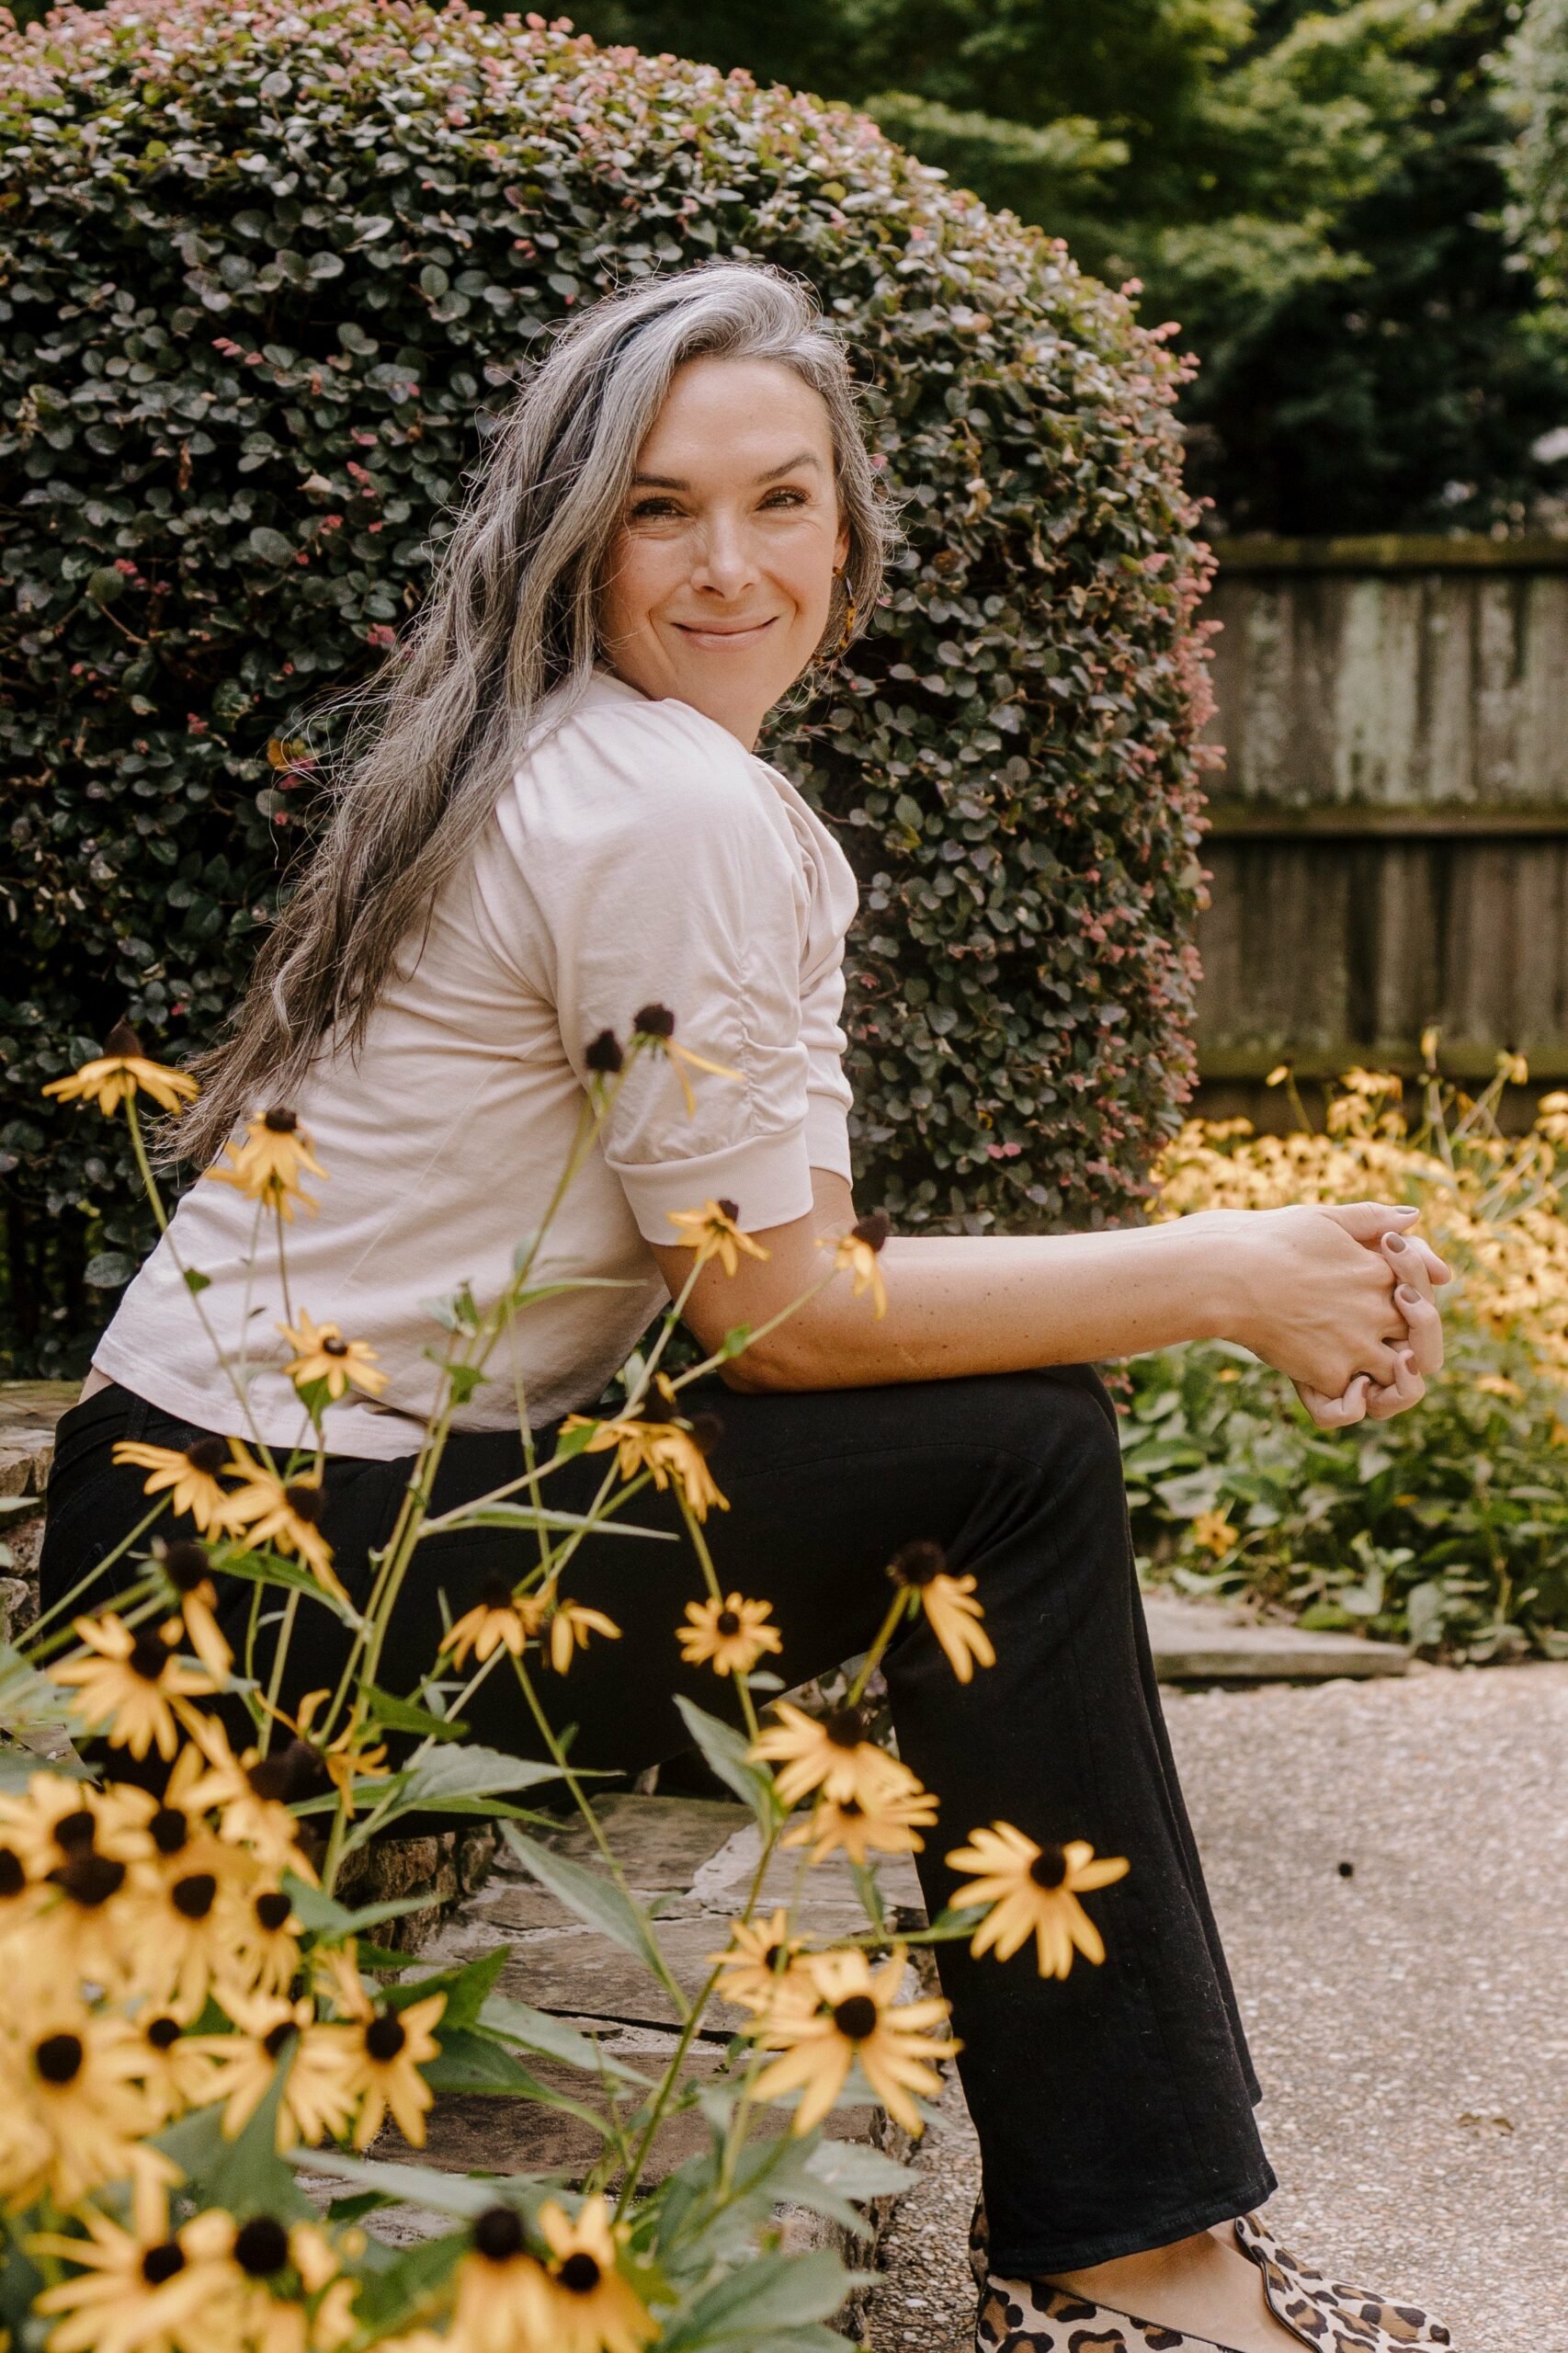 a woman with long wavy hair is seated near black eyed susan flowers in bloom